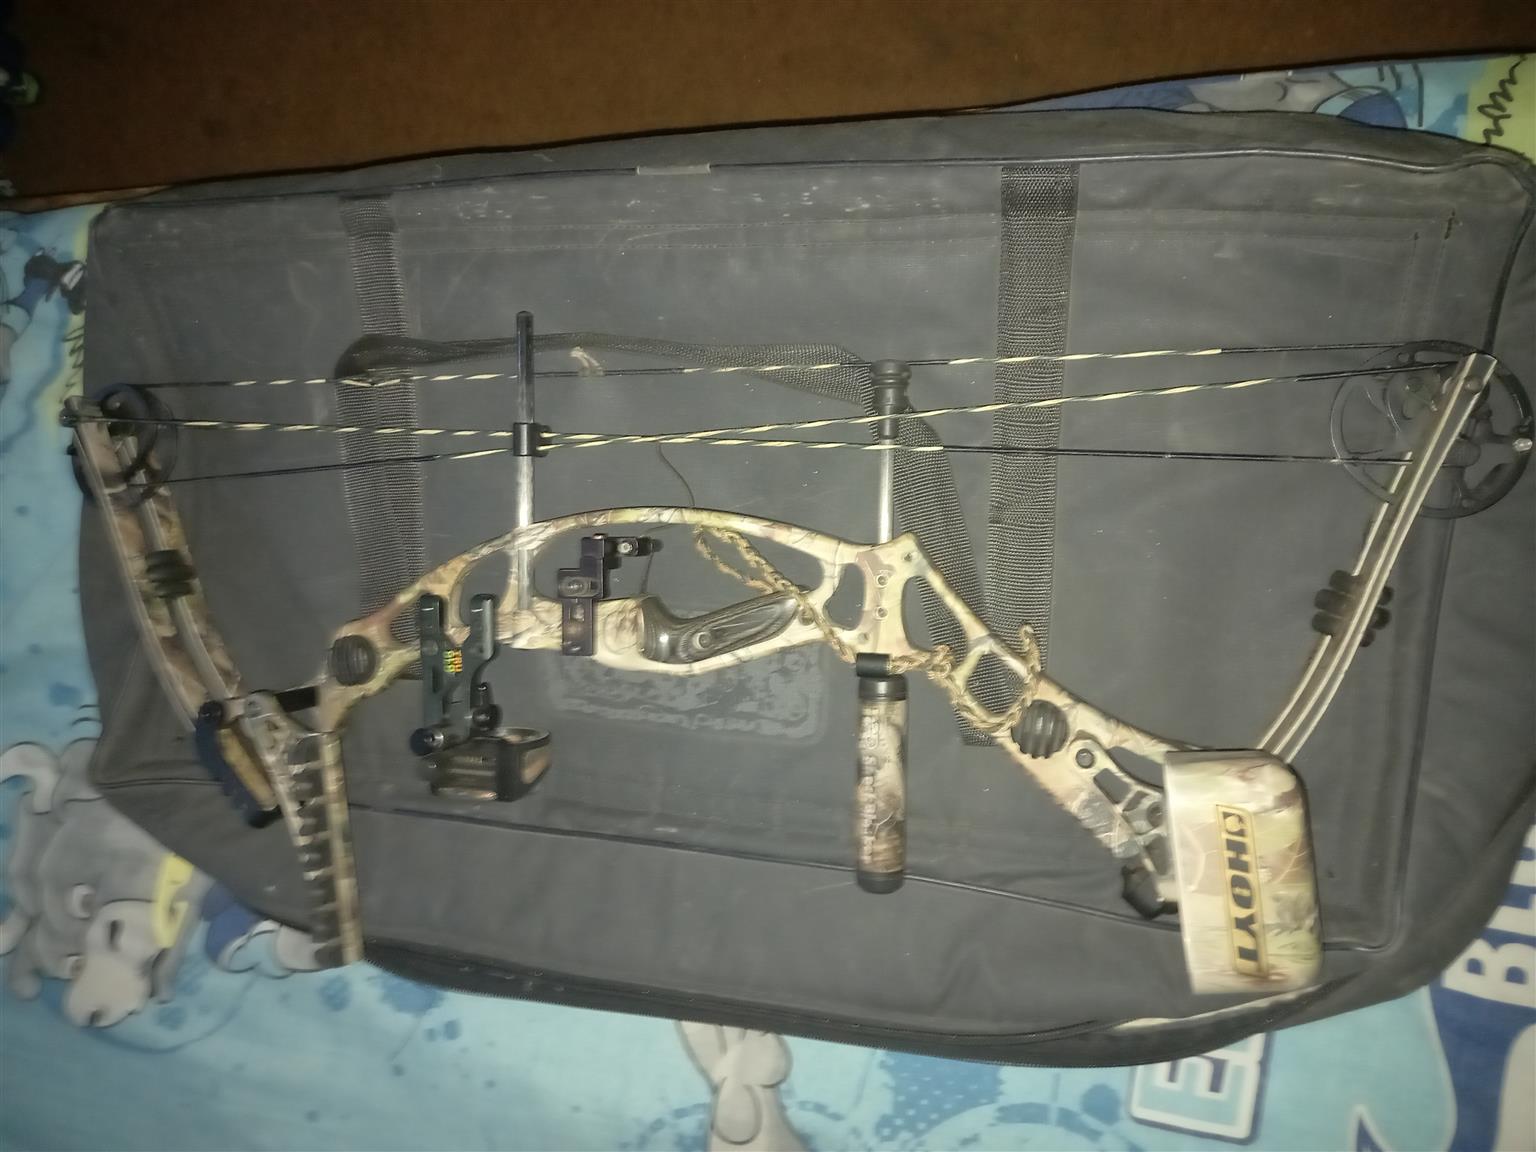 selling my hoyt katera selling because I dont have time to use any more R4000 neg